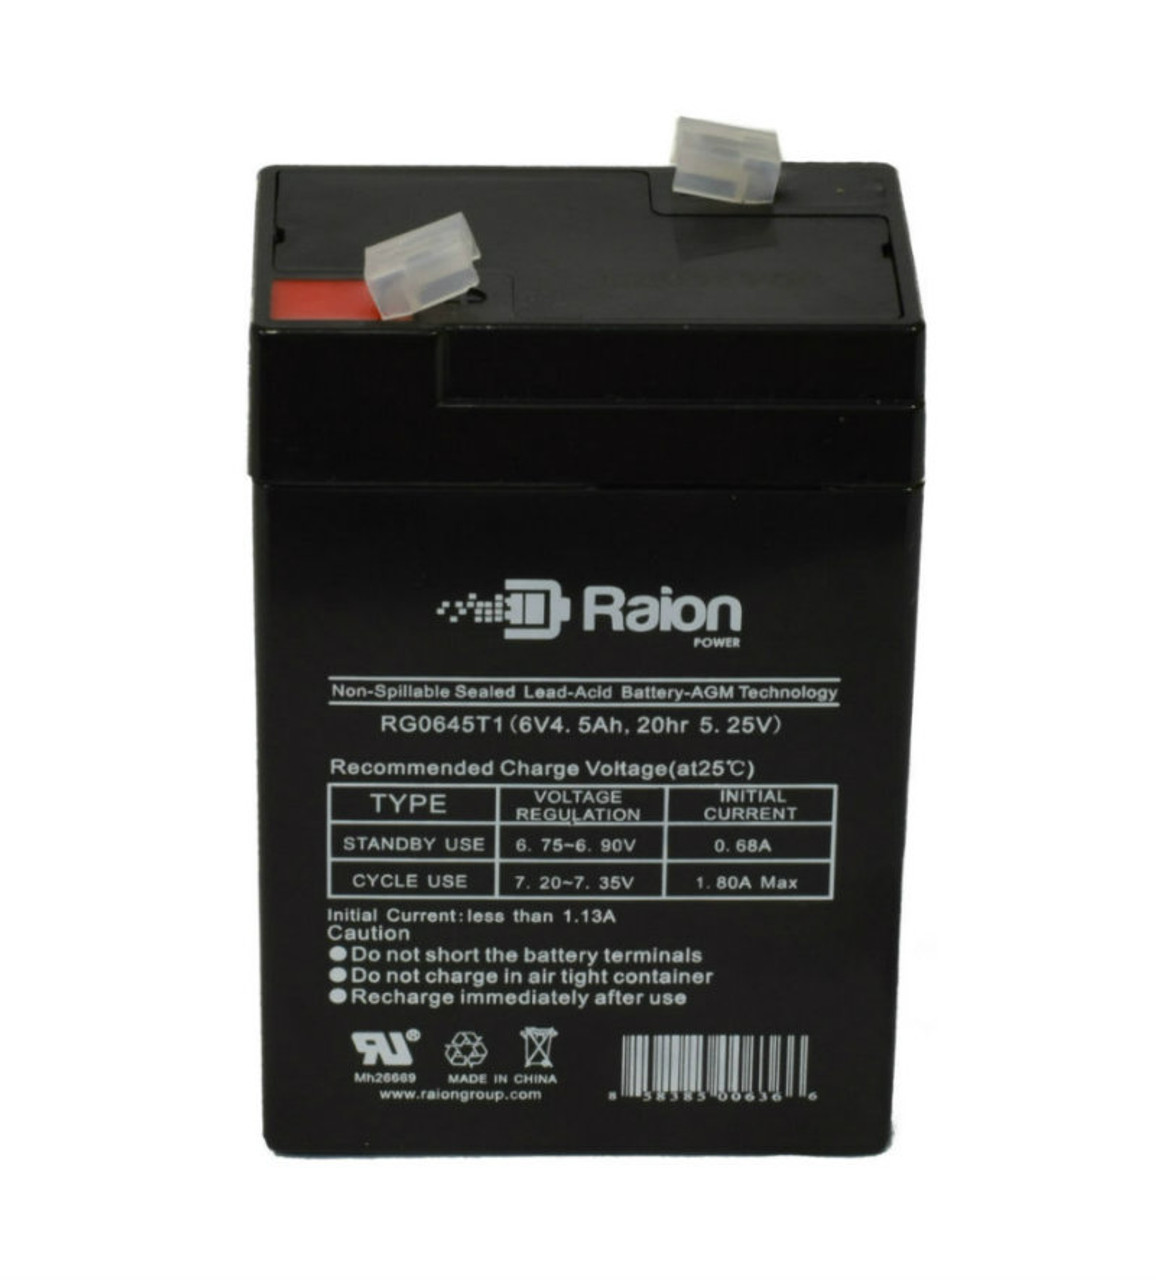 Raion Power RG0645T1 Replacement Battery Cartridge for Carpenter Watchman 713527